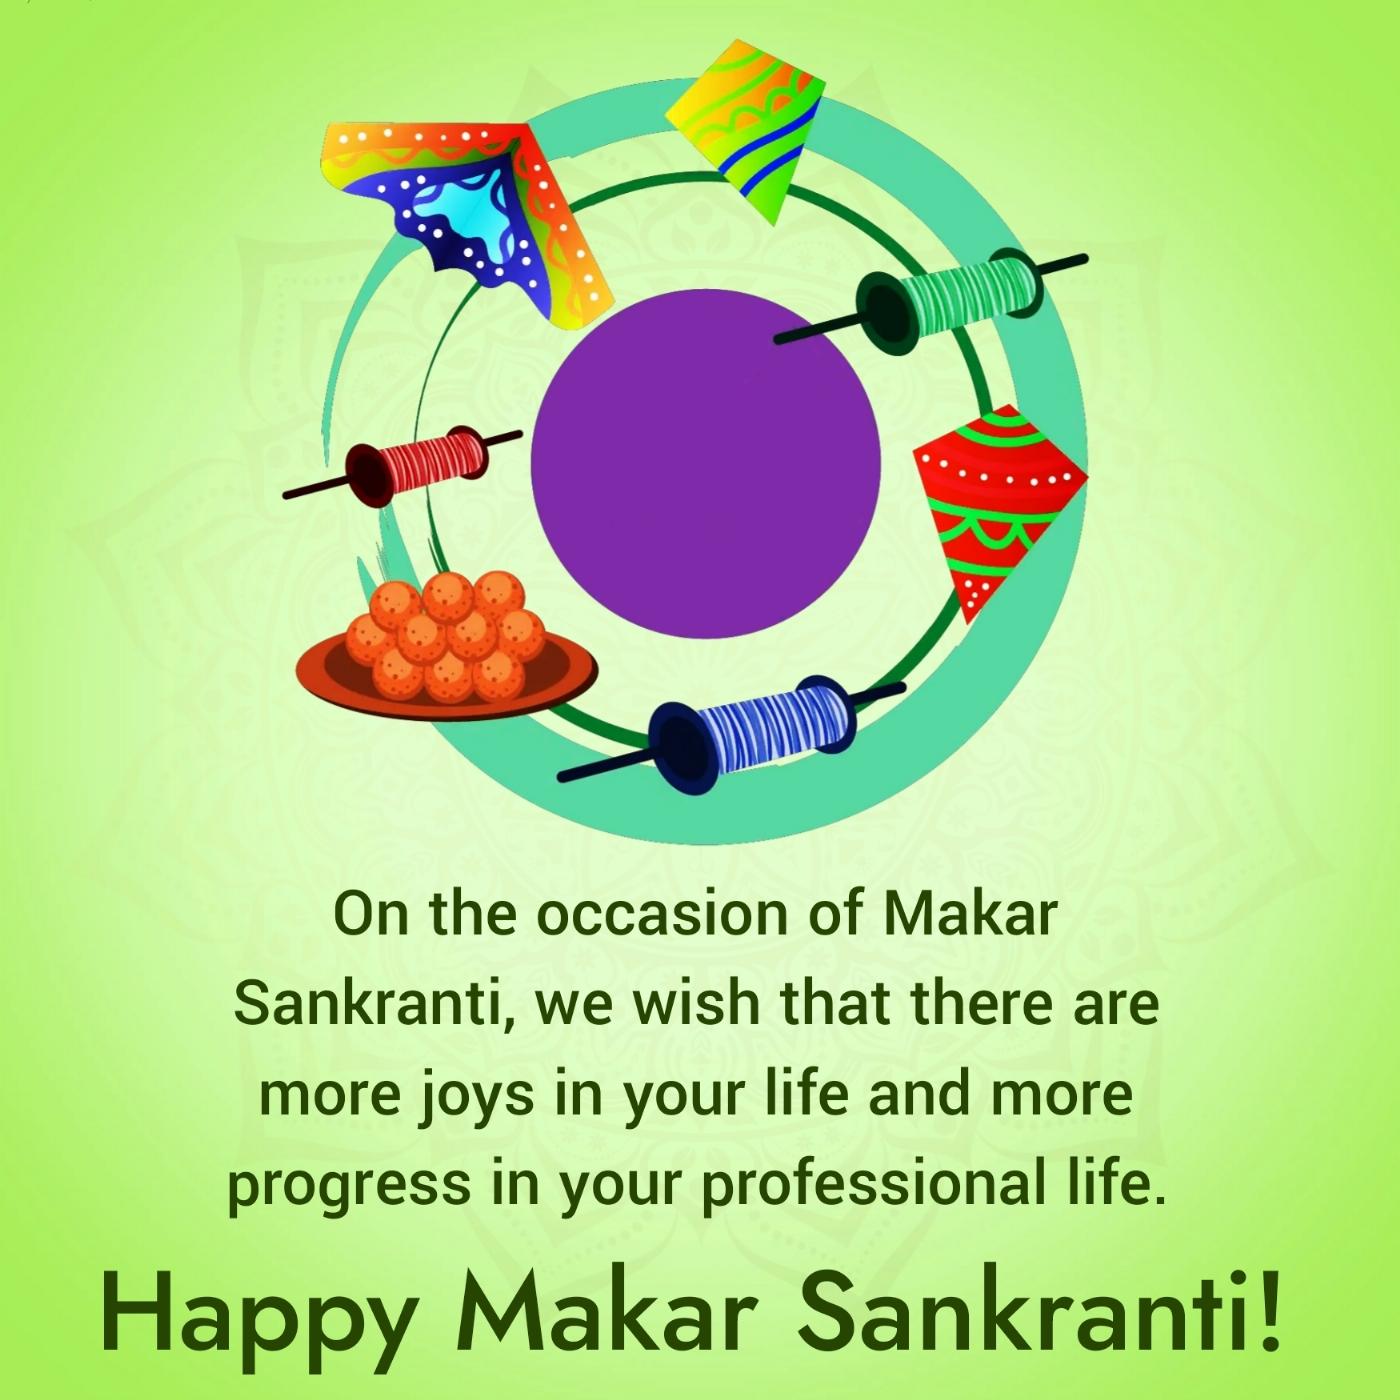 On the occasion of Makar Sankranti we wish that